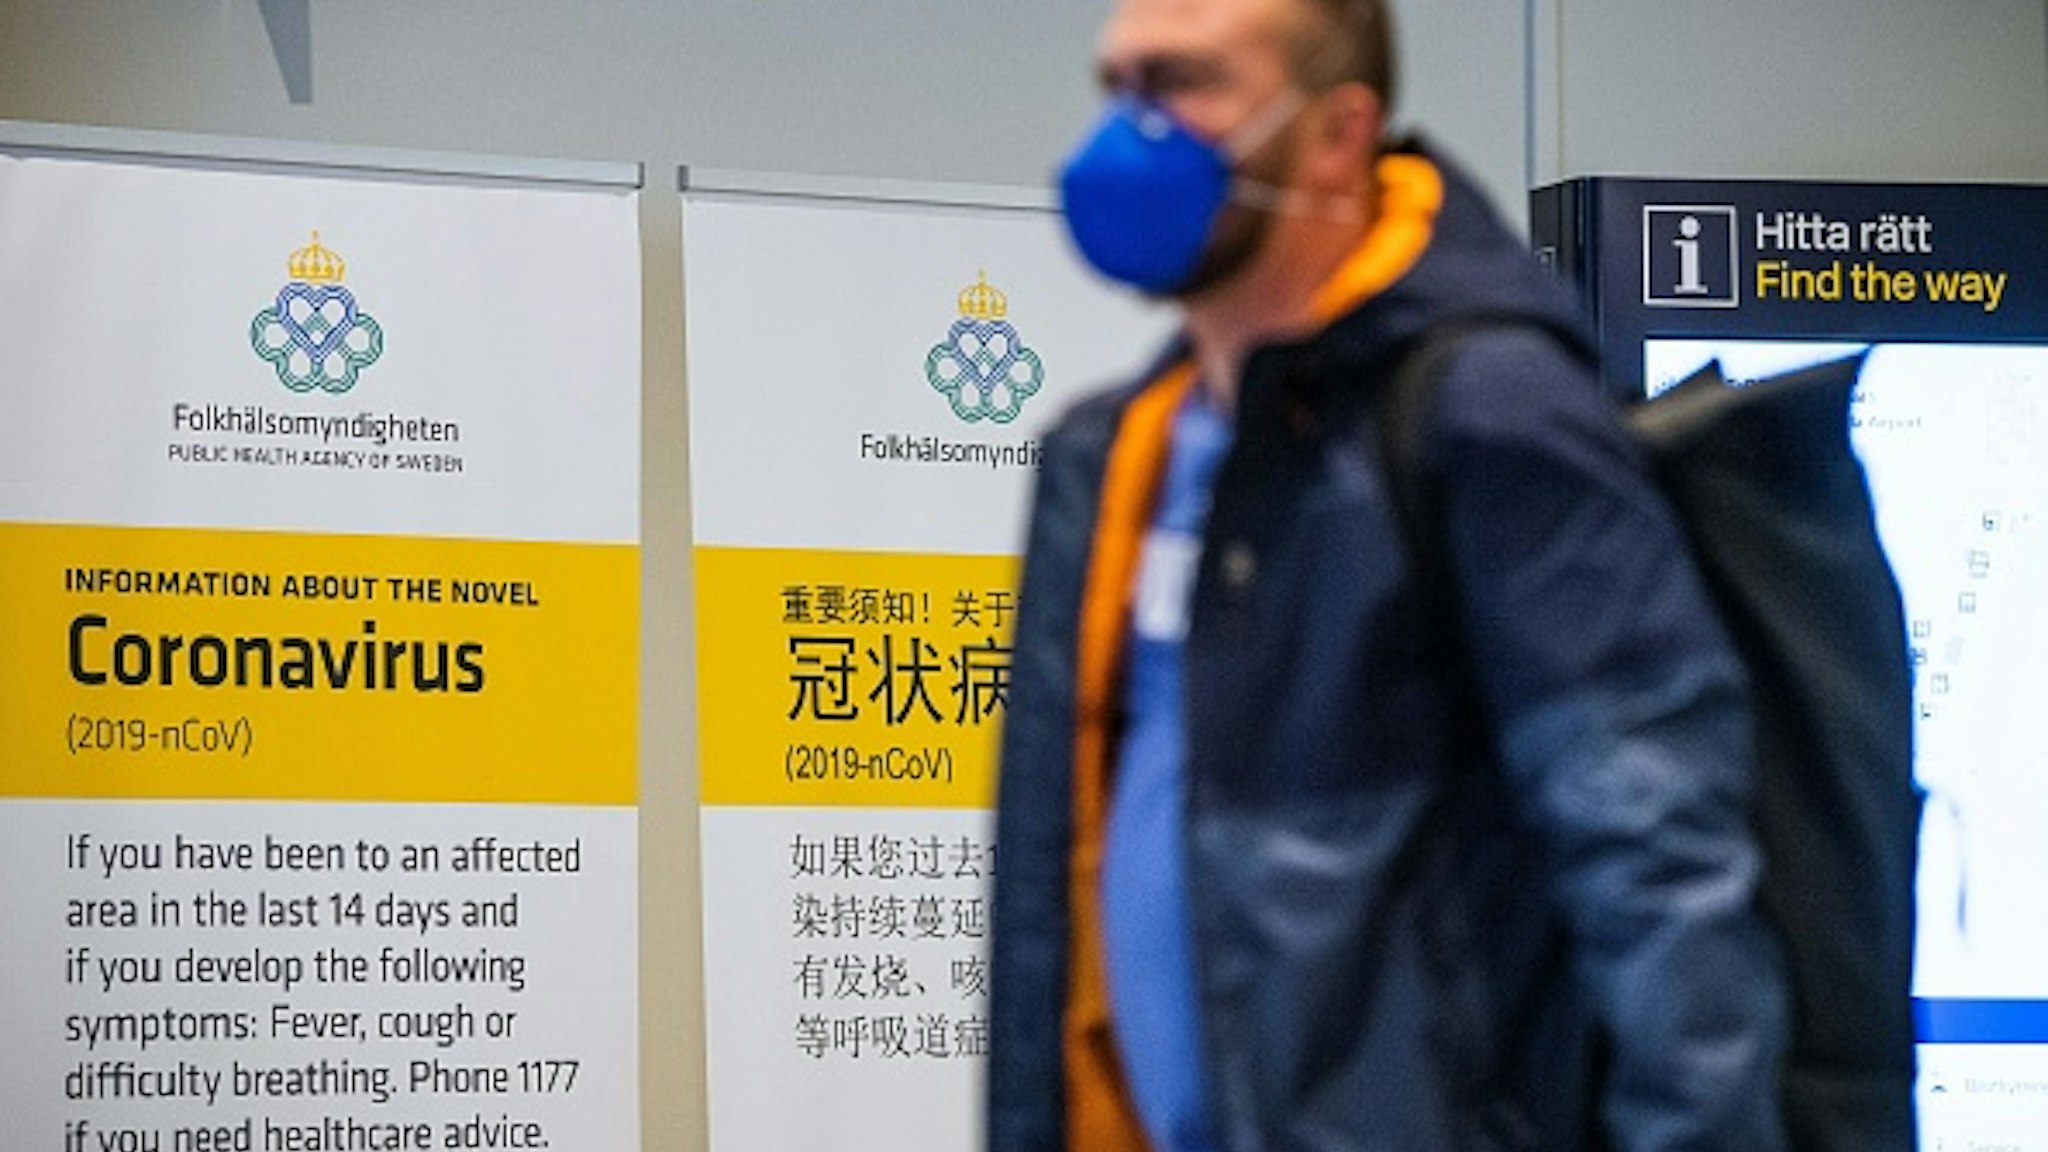 A passenger arriving in Stockholm's Arlanda airport is greeted by signs produced by the public health agency advising travelers what to do if they show symptoms of infection by the new coronavirus after arriving in Sweden on March 5, 2020.